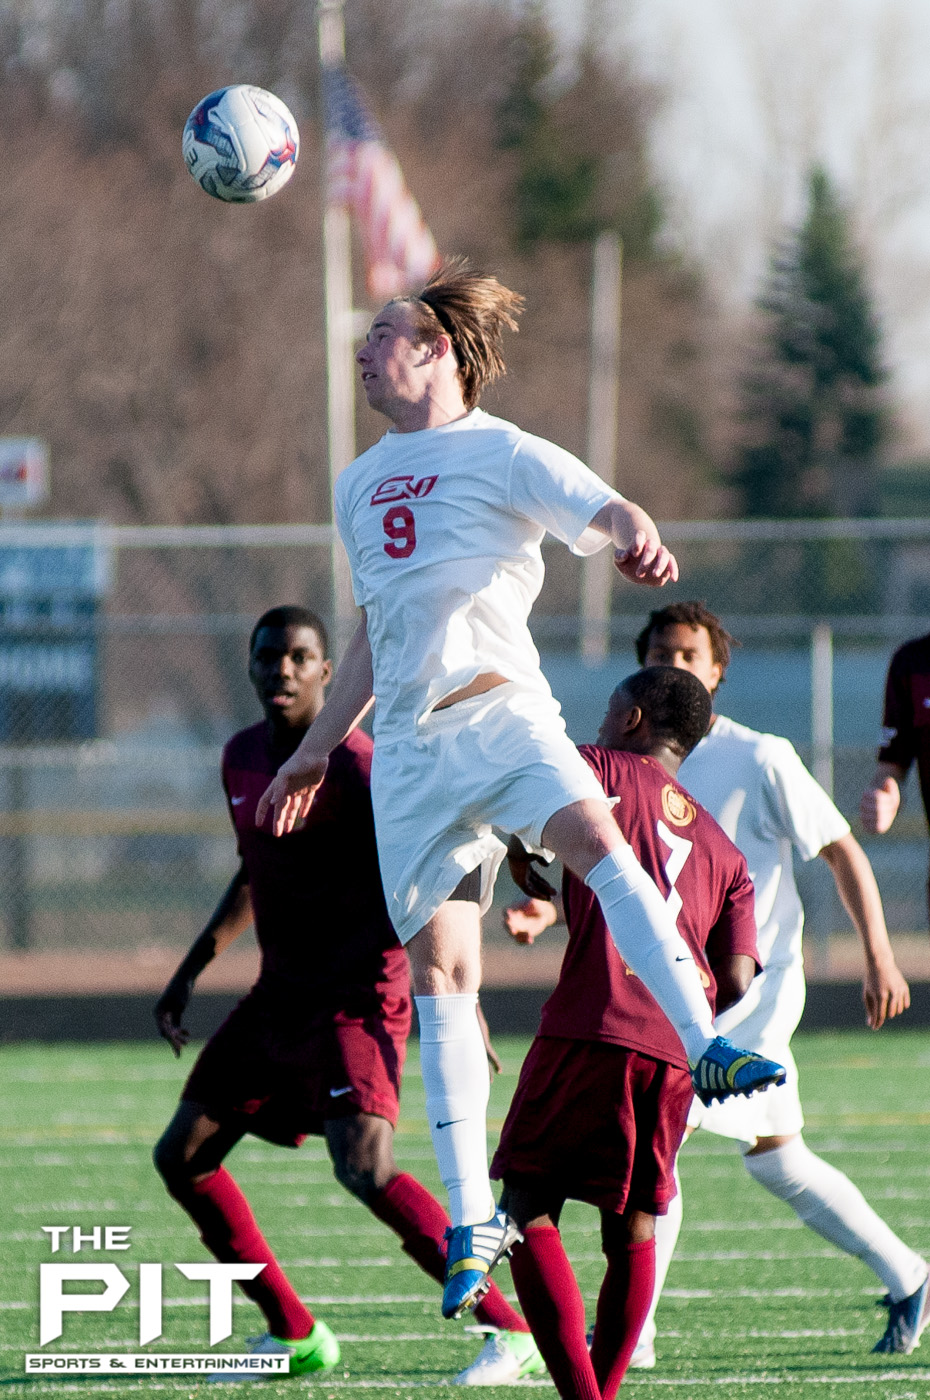 A Saginaw Valley player head-butts the ball to regain control for his team. SVSU lost the scrimmage match against Detroit City FC 1-0 on April 19, 2014 at Hurley Field. Brian Quintos / The Pit: SE